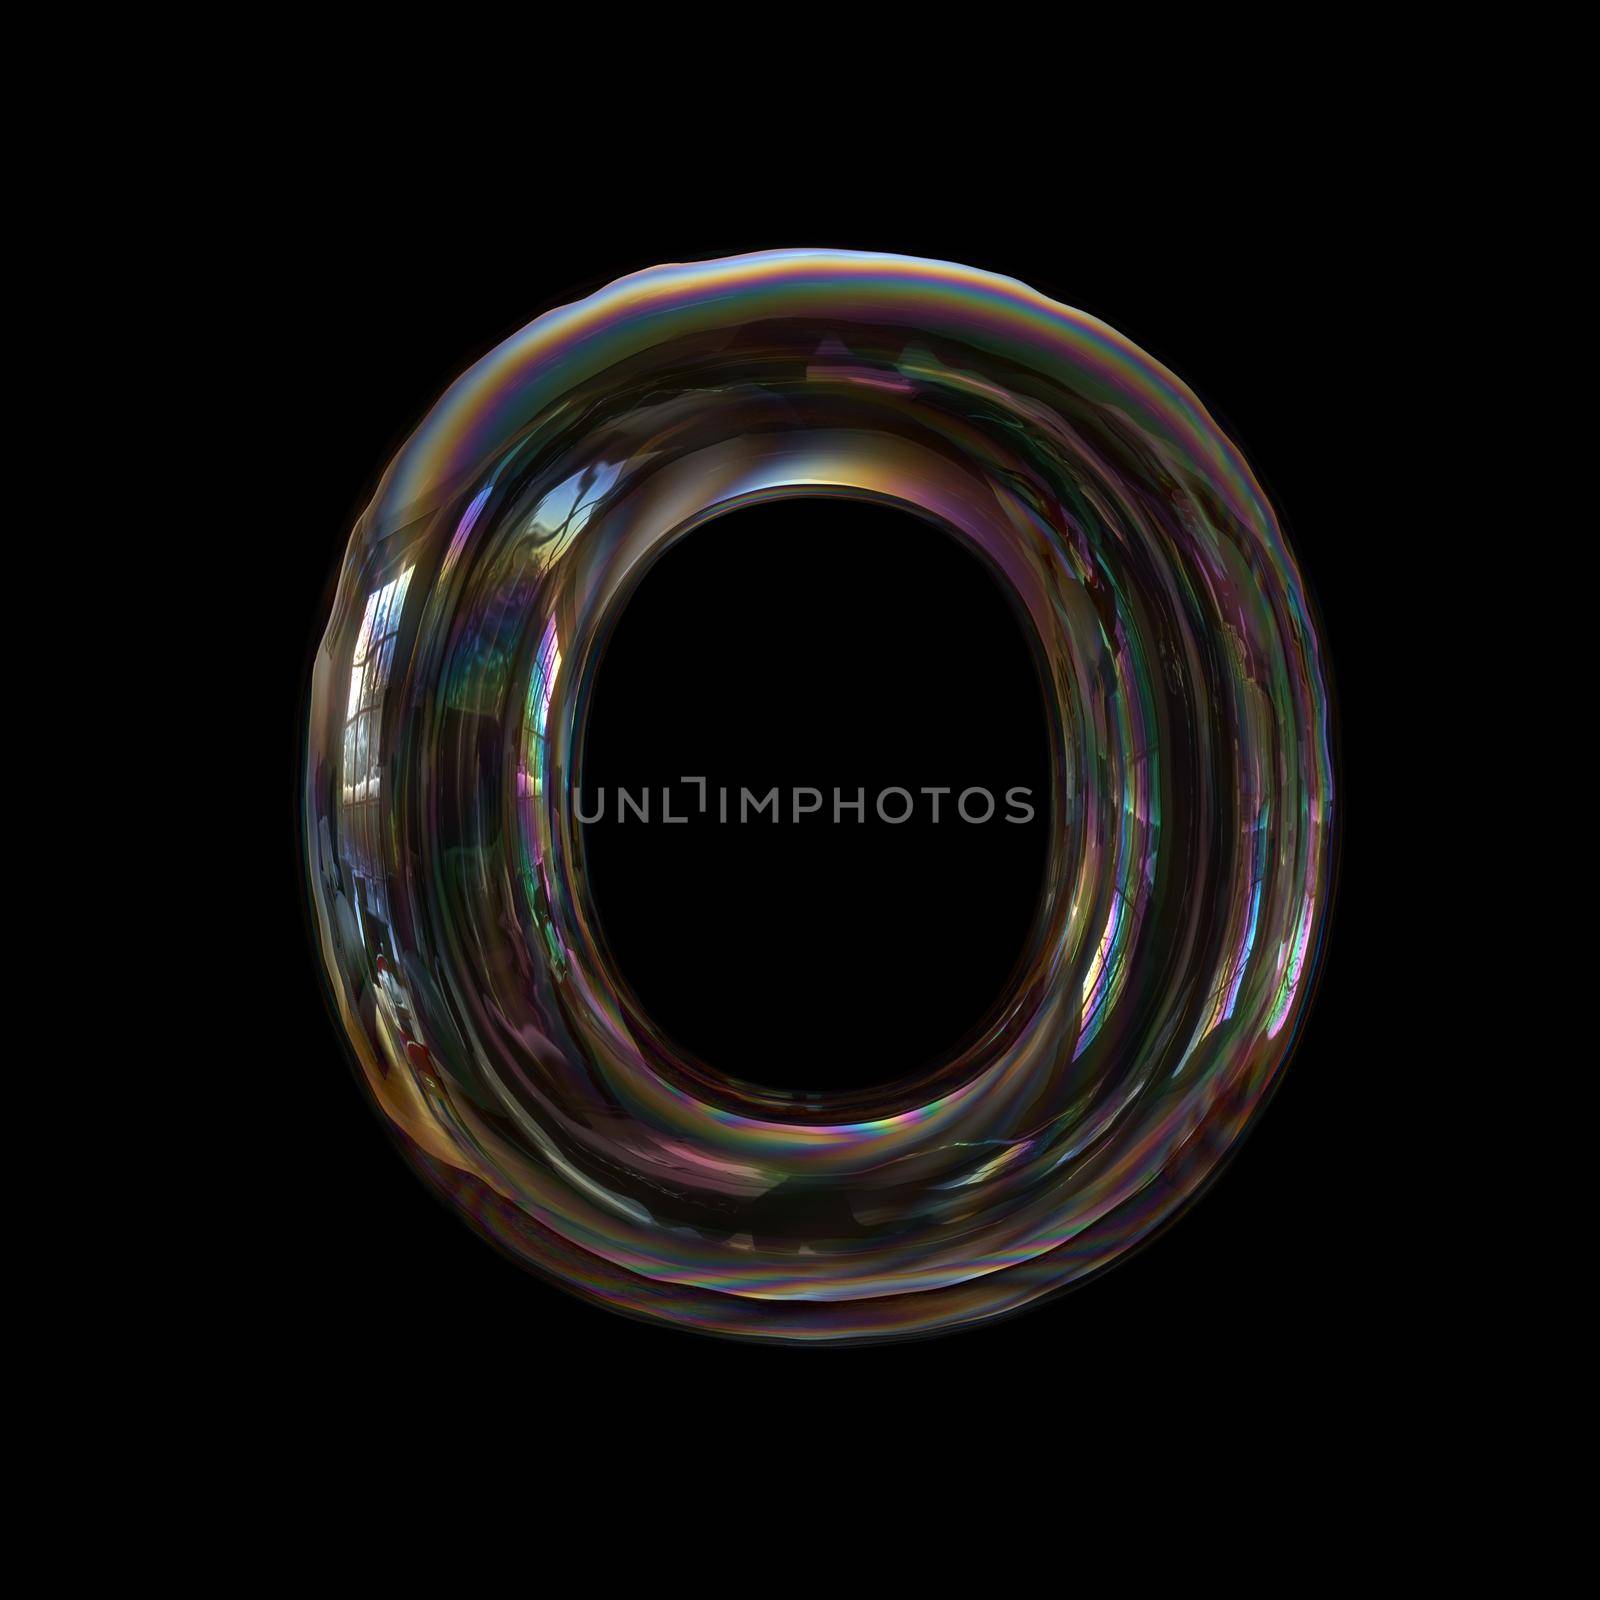 bubble writing alphabet letter O - Upper-case 3d font isolated on a black background.
This 3d font collection is well-suited for various creative projects including but not limited to : Childhood. events. nature...